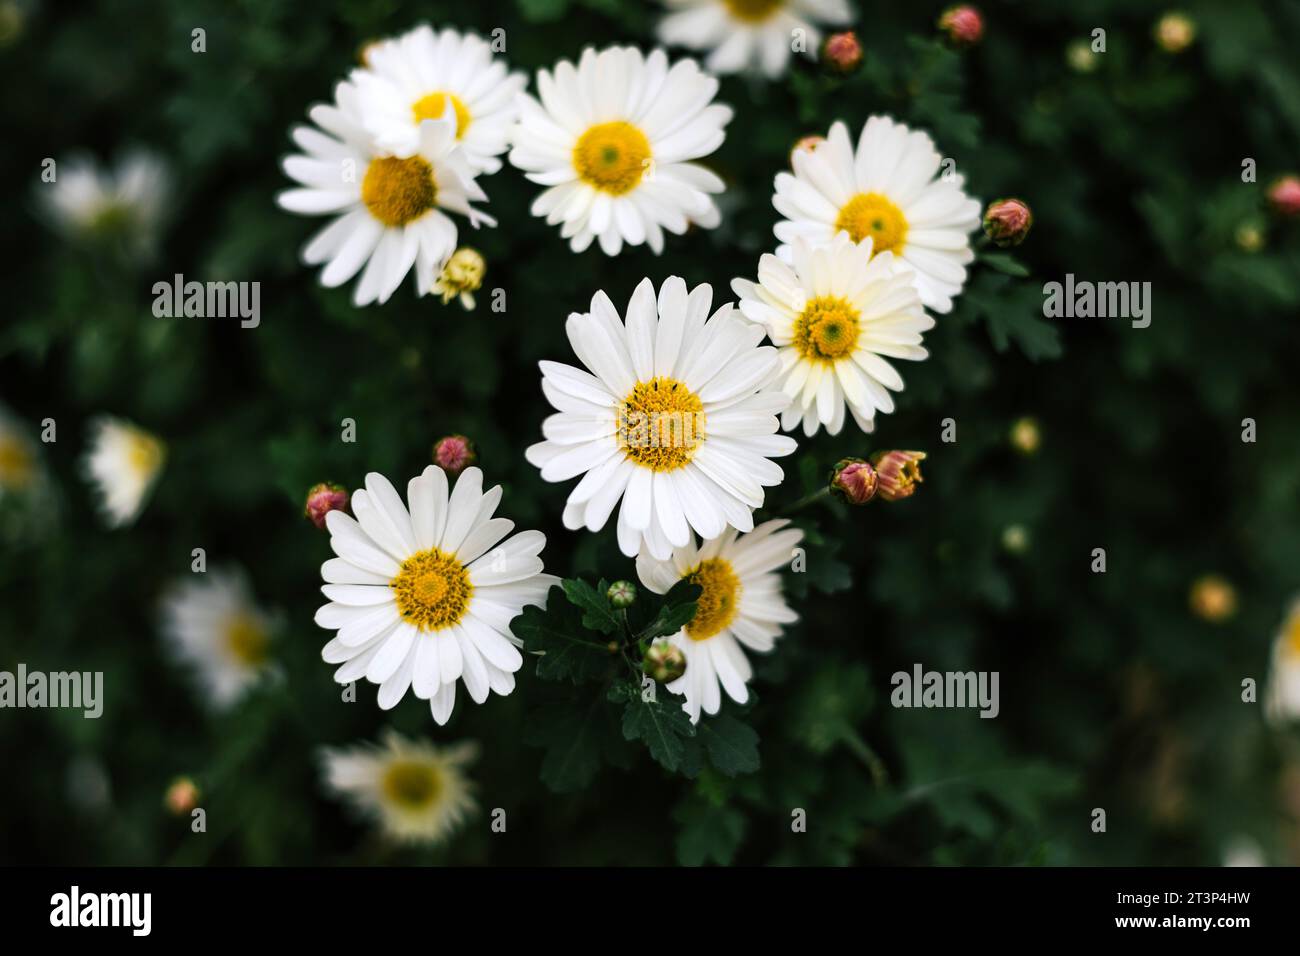 Matricaria chamomilla annual flowering plant of the Asteraceae family. Daisy bush With white petals, yellow inflorescence and green stems. Summer flor Stock Photo